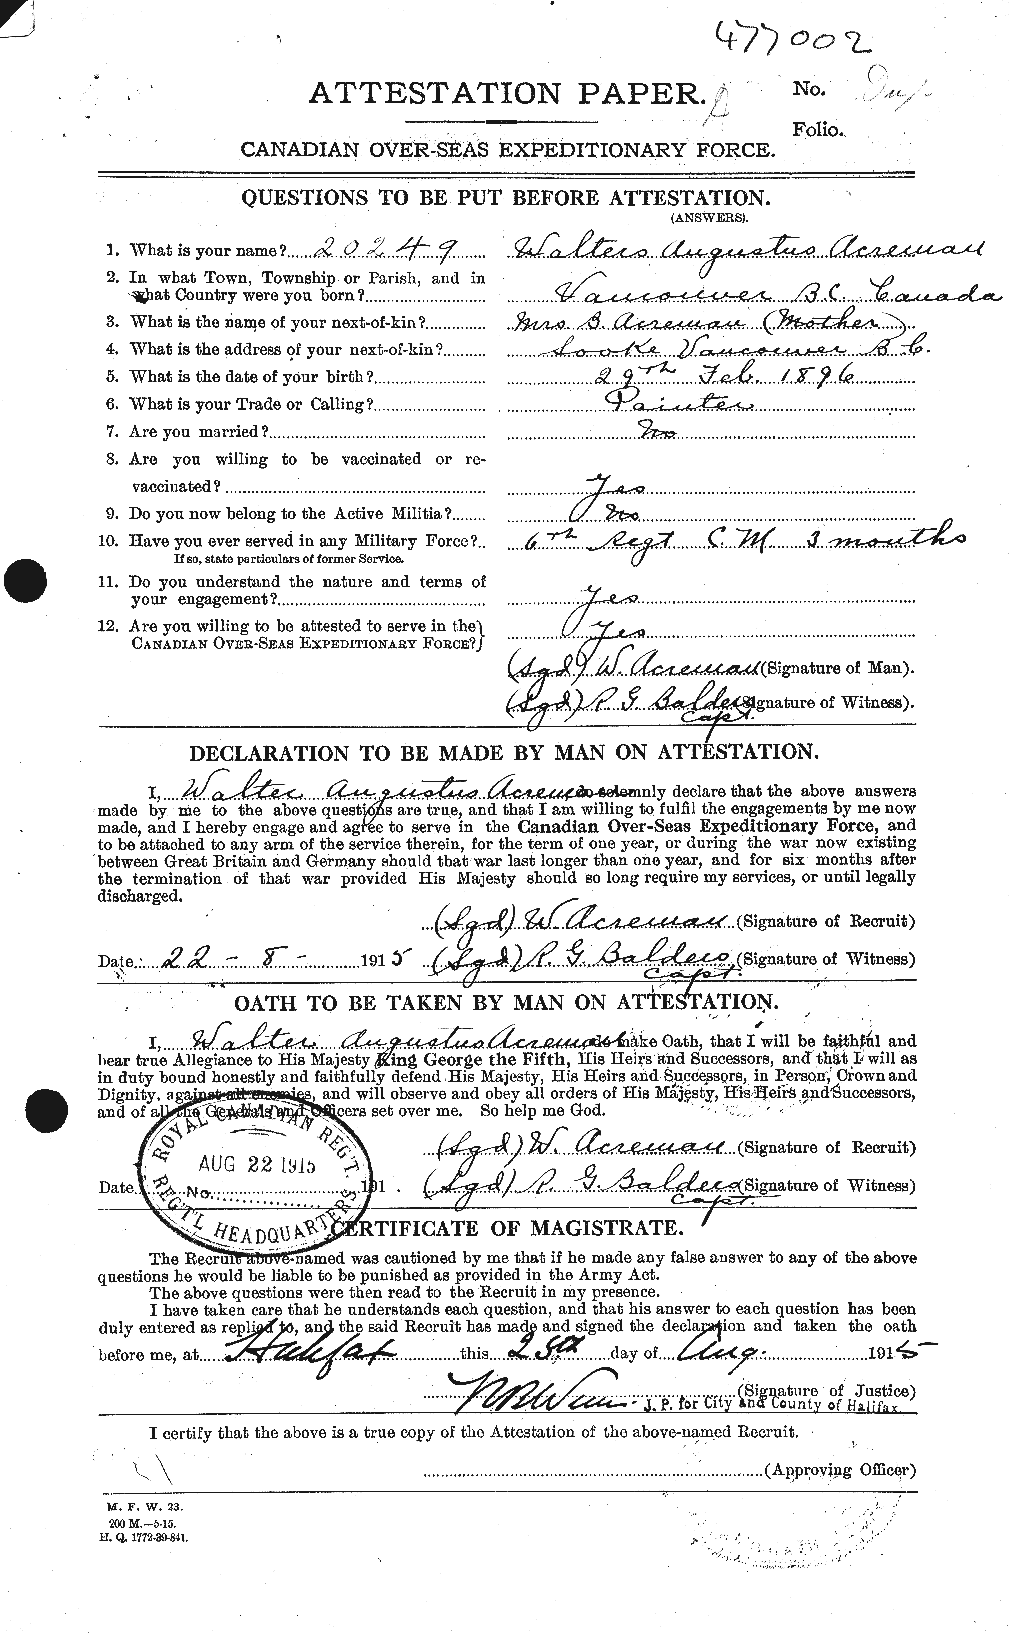 Personnel Records of the First World War - CEF 200878a